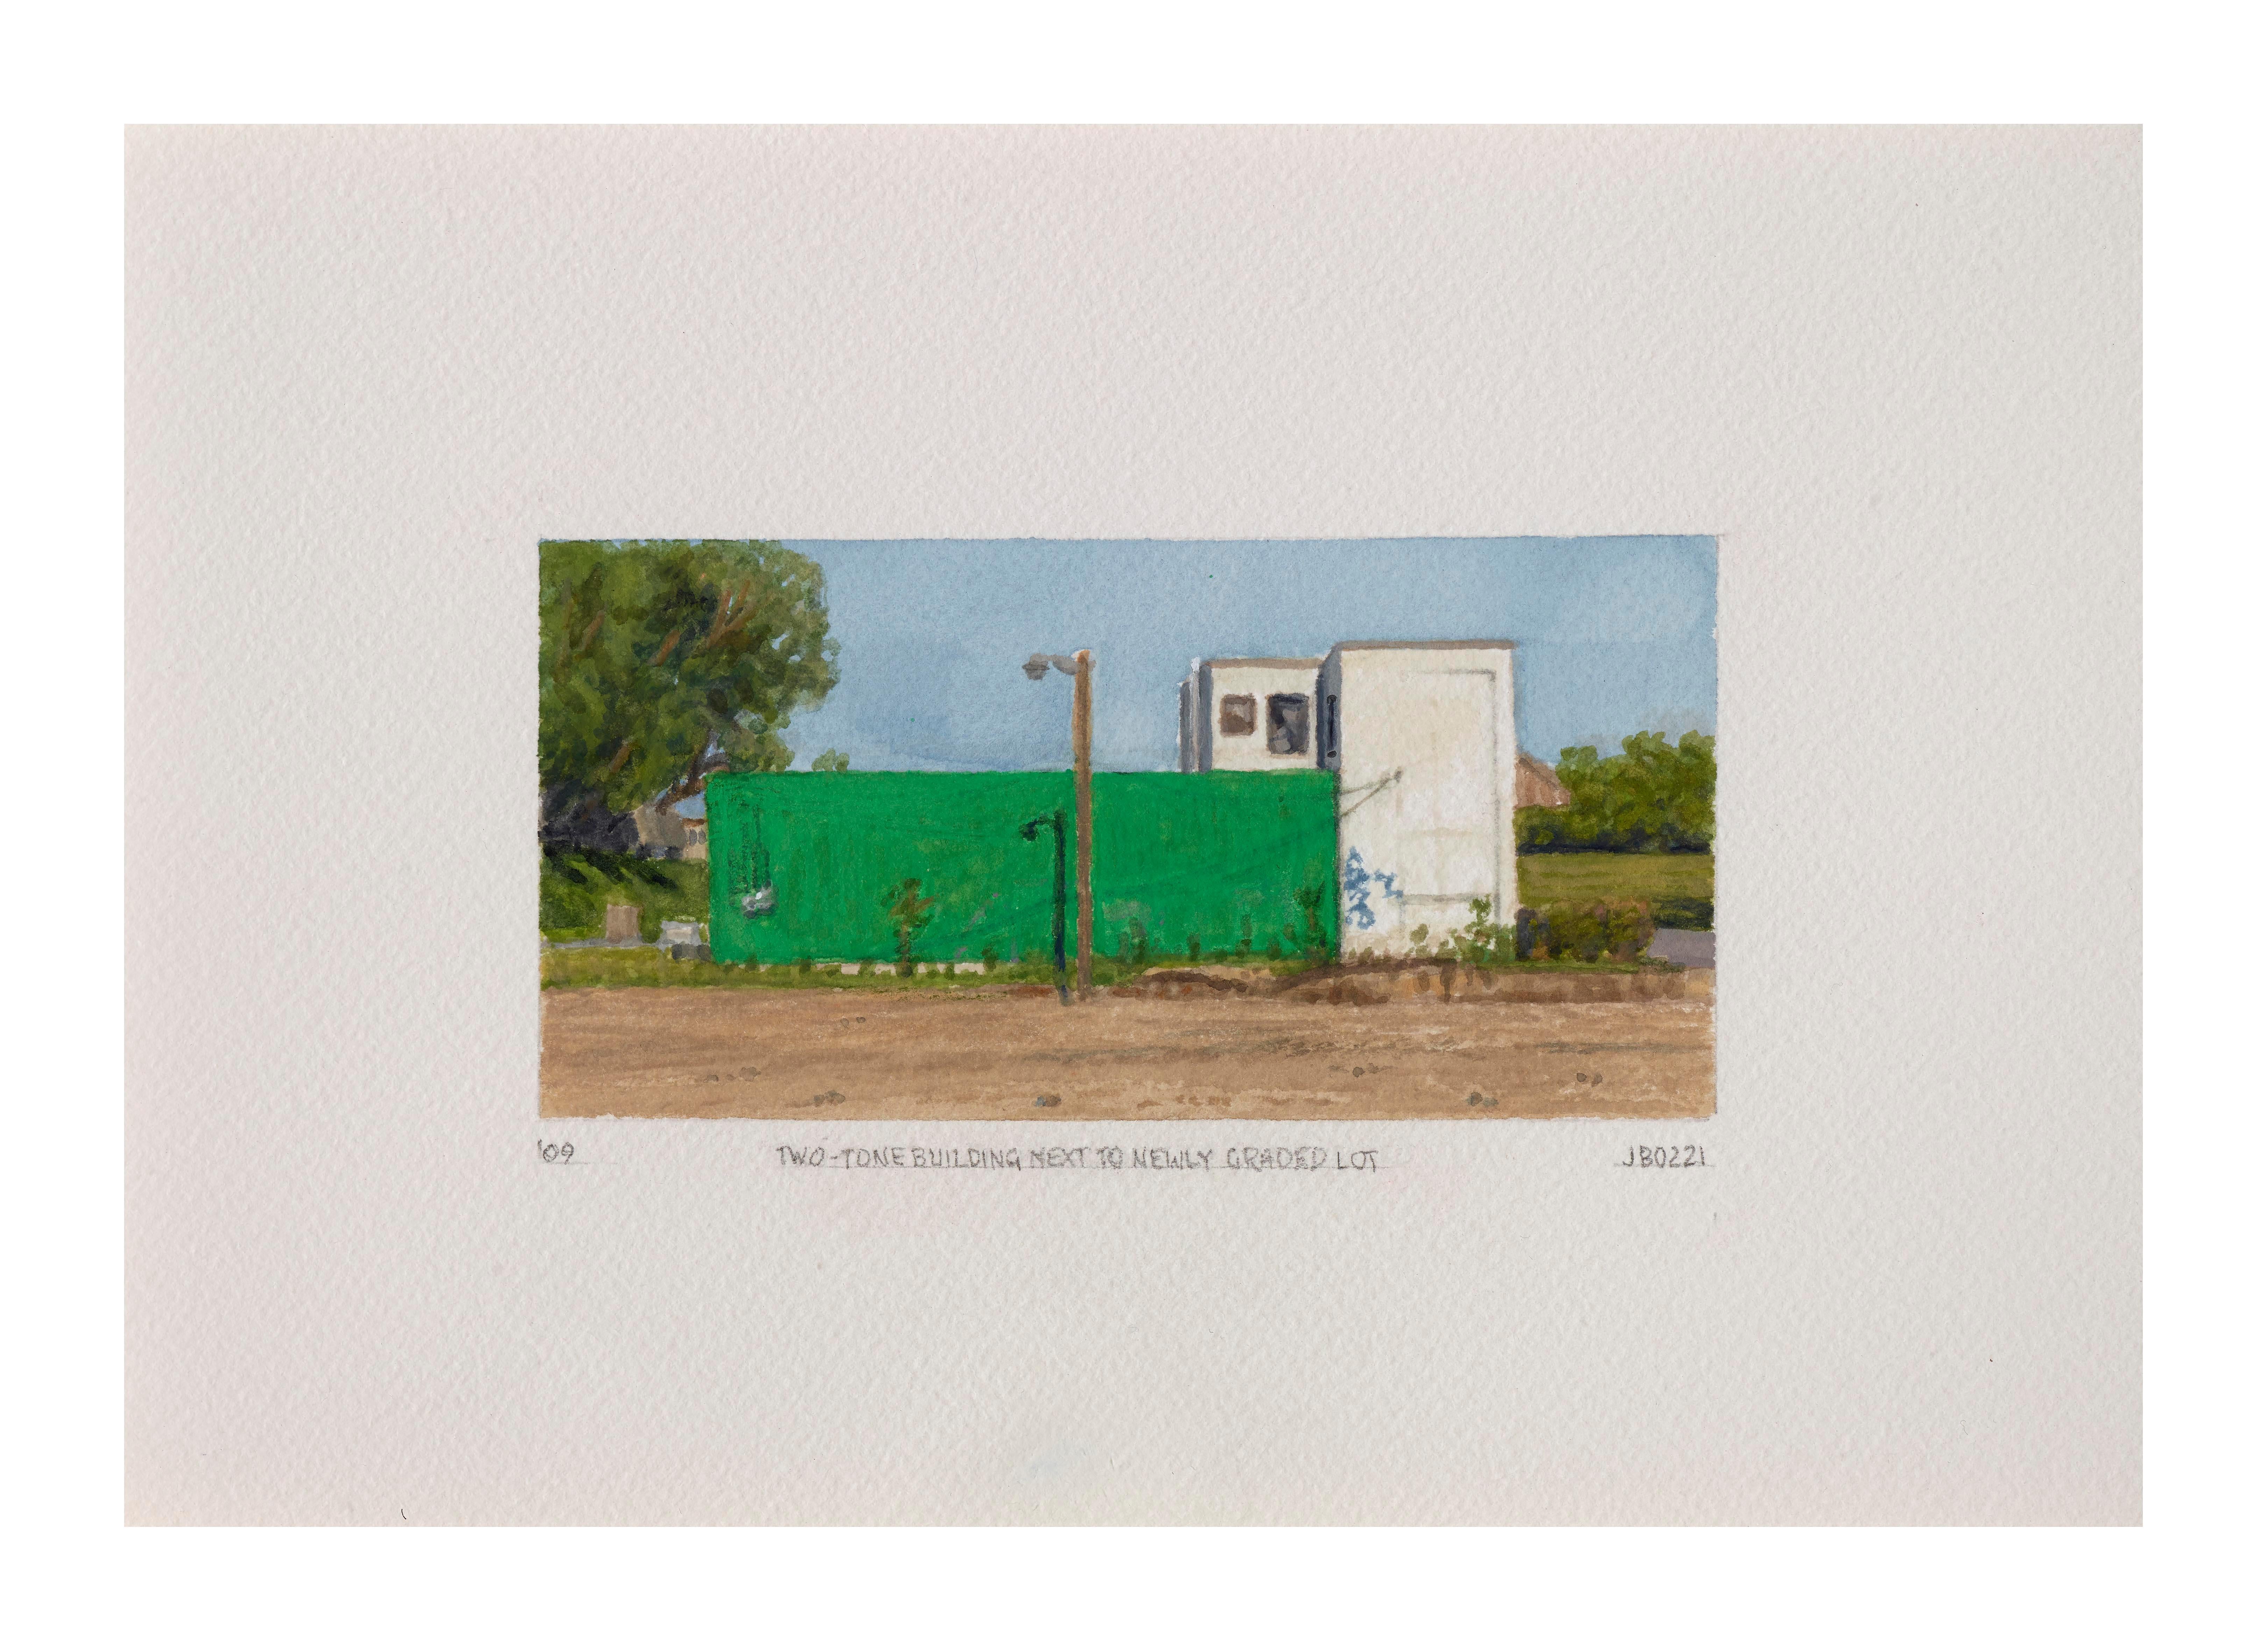 Two Tone Building Next to Newly Graded Lot - Art by Julie Bozzi